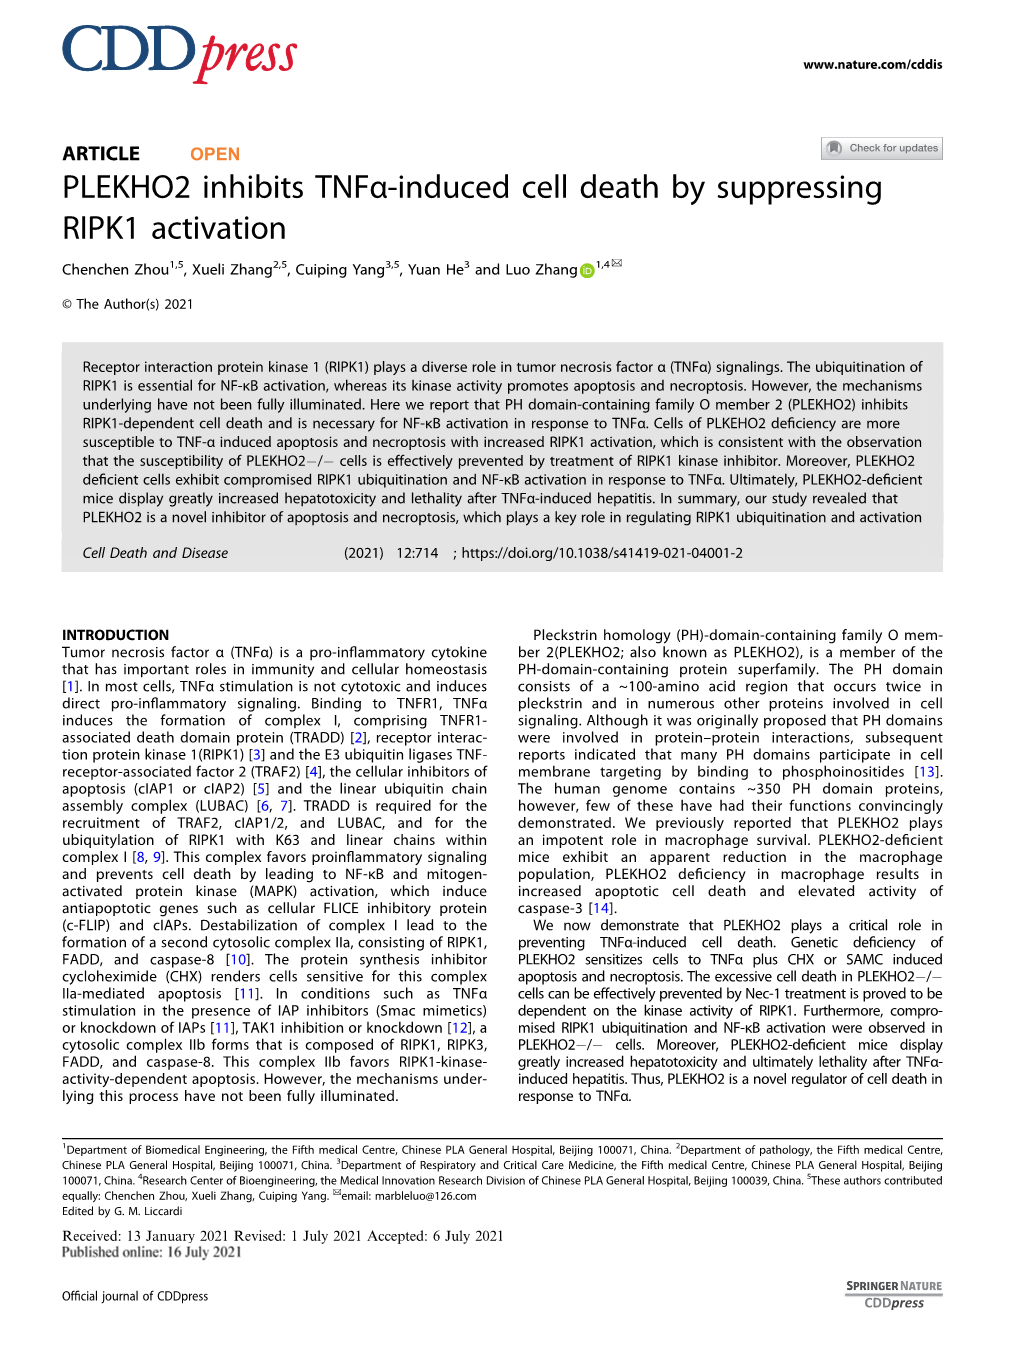 PLEKHO2 Inhibits Tnfα-Induced Cell Death by Suppressing RIPK1 Activation ✉ Chenchen Zhou1,5, Xueli Zhang2,5, Cuiping Yang3,5, Yuan He3 and Luo Zhang 1,4